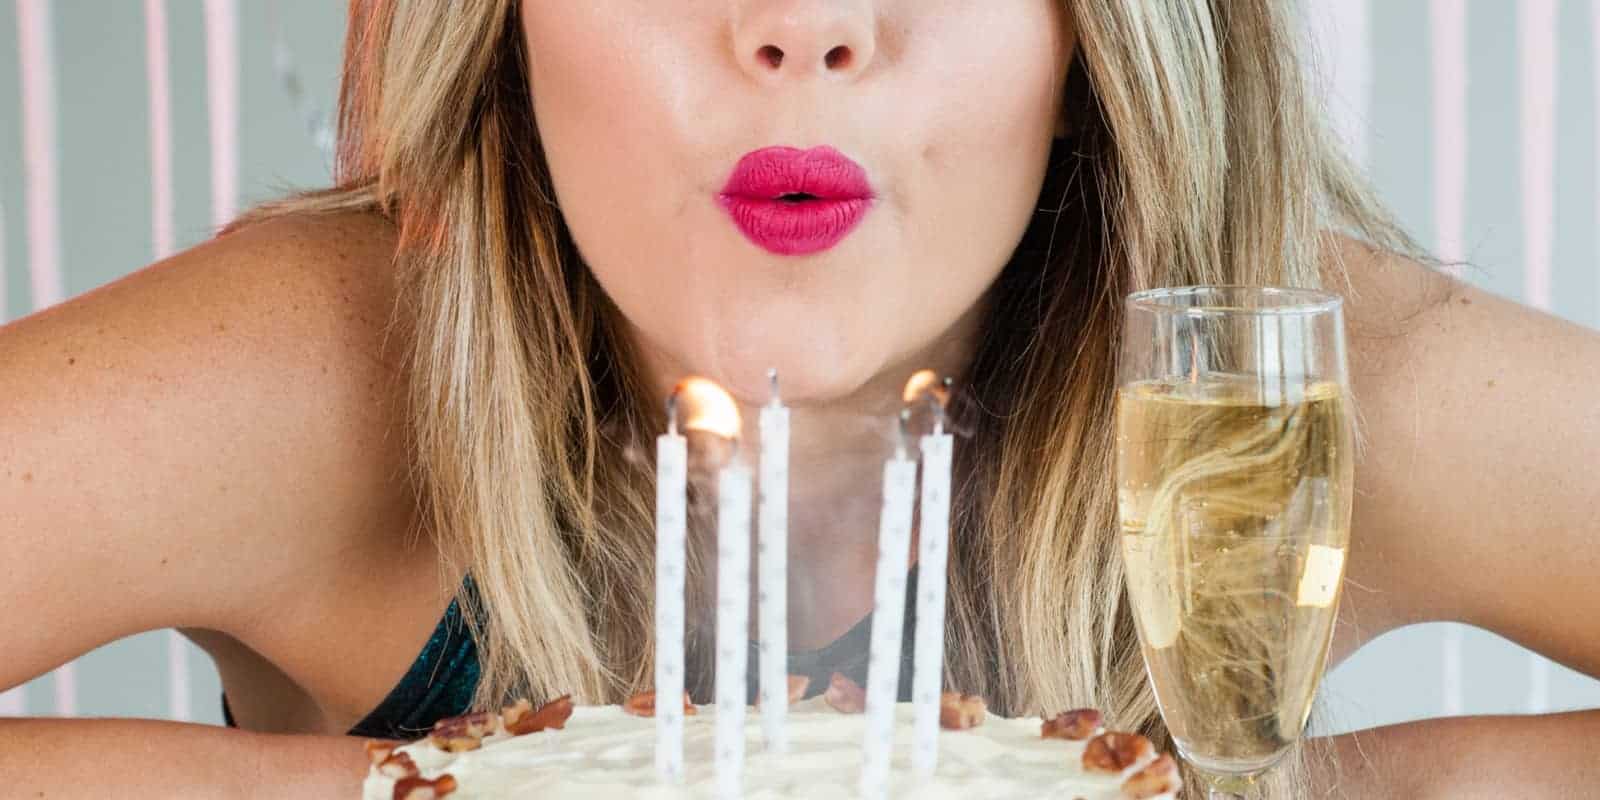 25 Things to Let Go Before Your Next Birthday